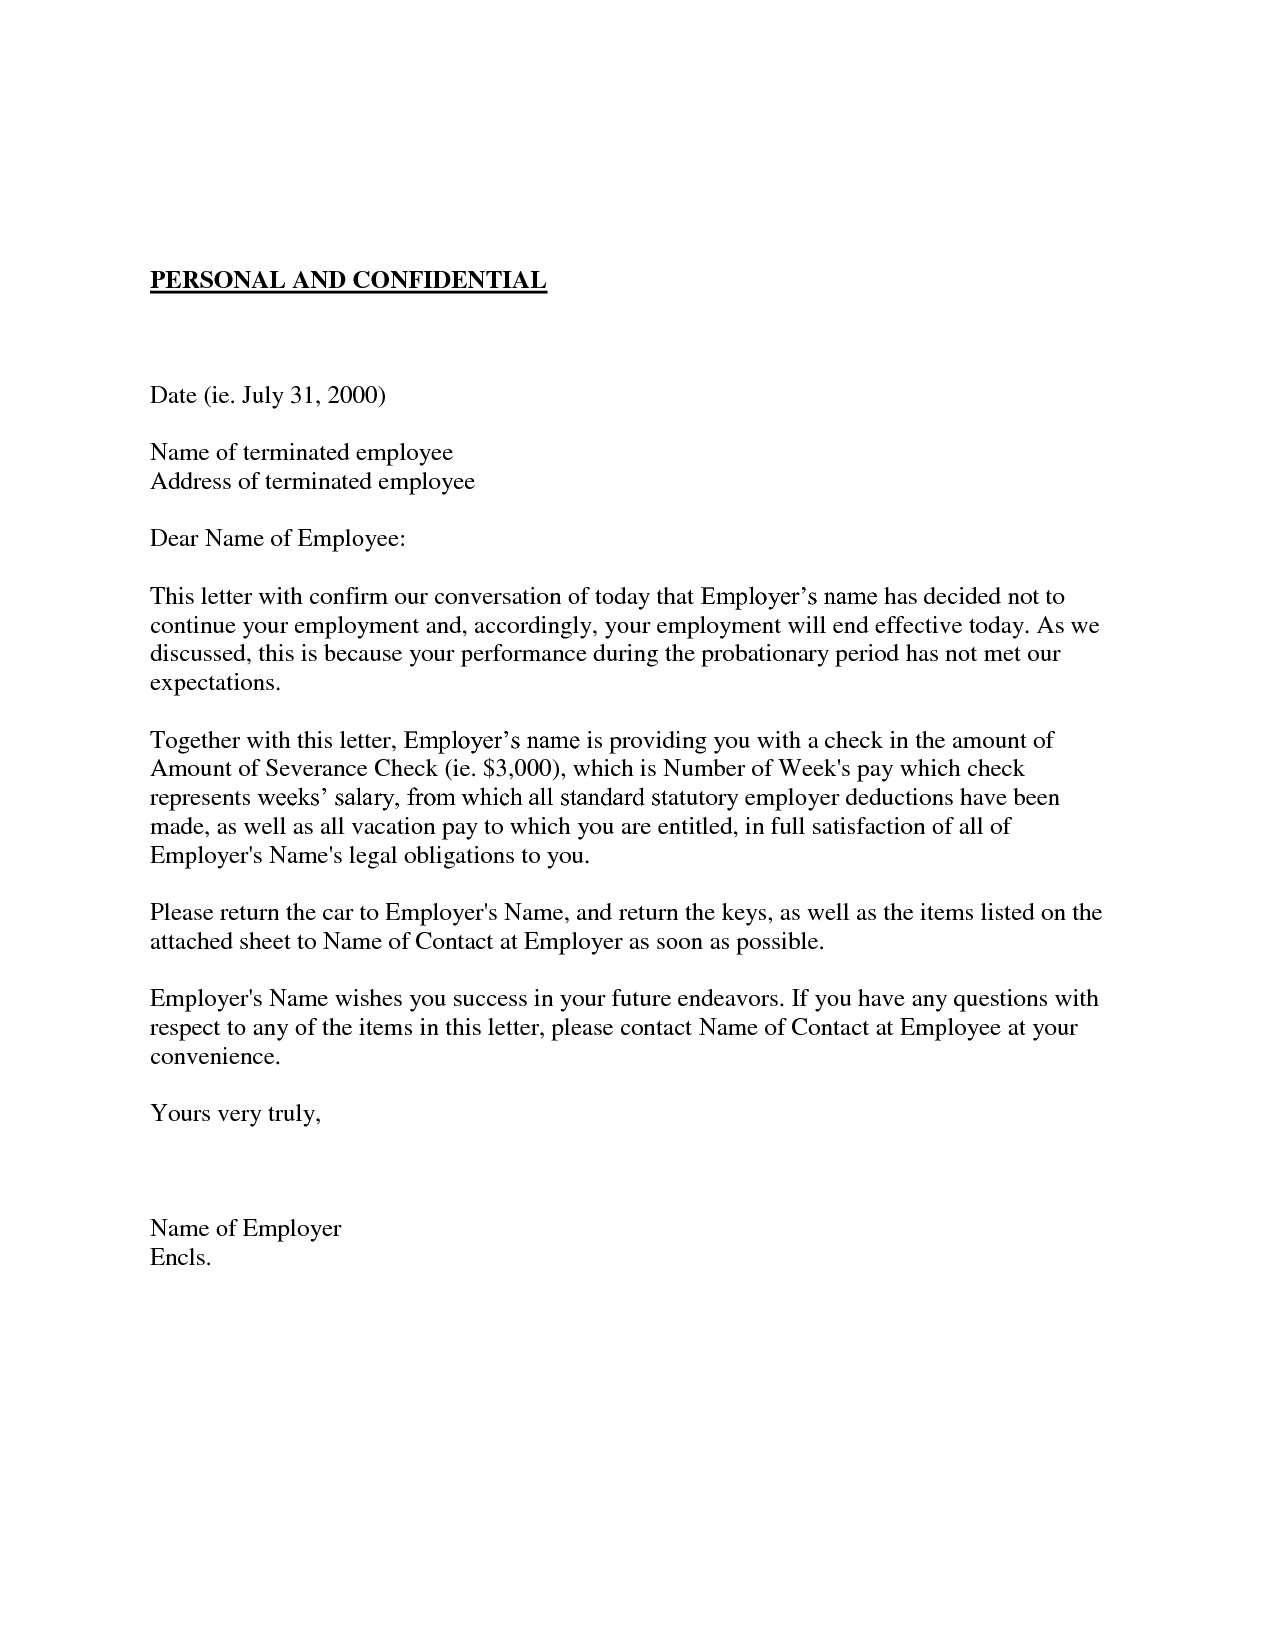 Probation Termination Letter Template - Sample Certificate Employment and Pensation Fresh Employment